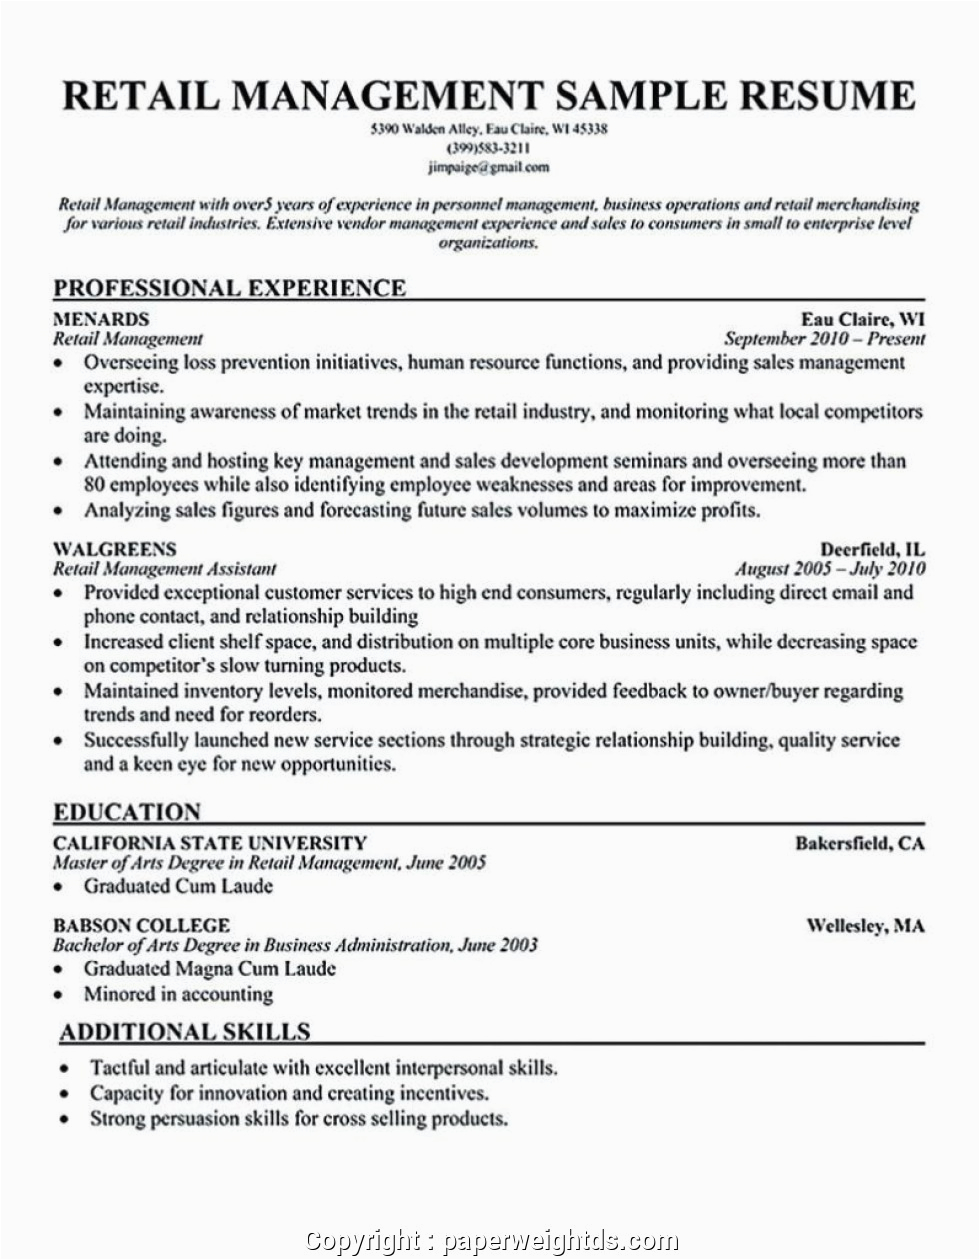 Free Sample Resume Retail Store Manager Simple Hardware Store Manager Resume Retail Store Resume